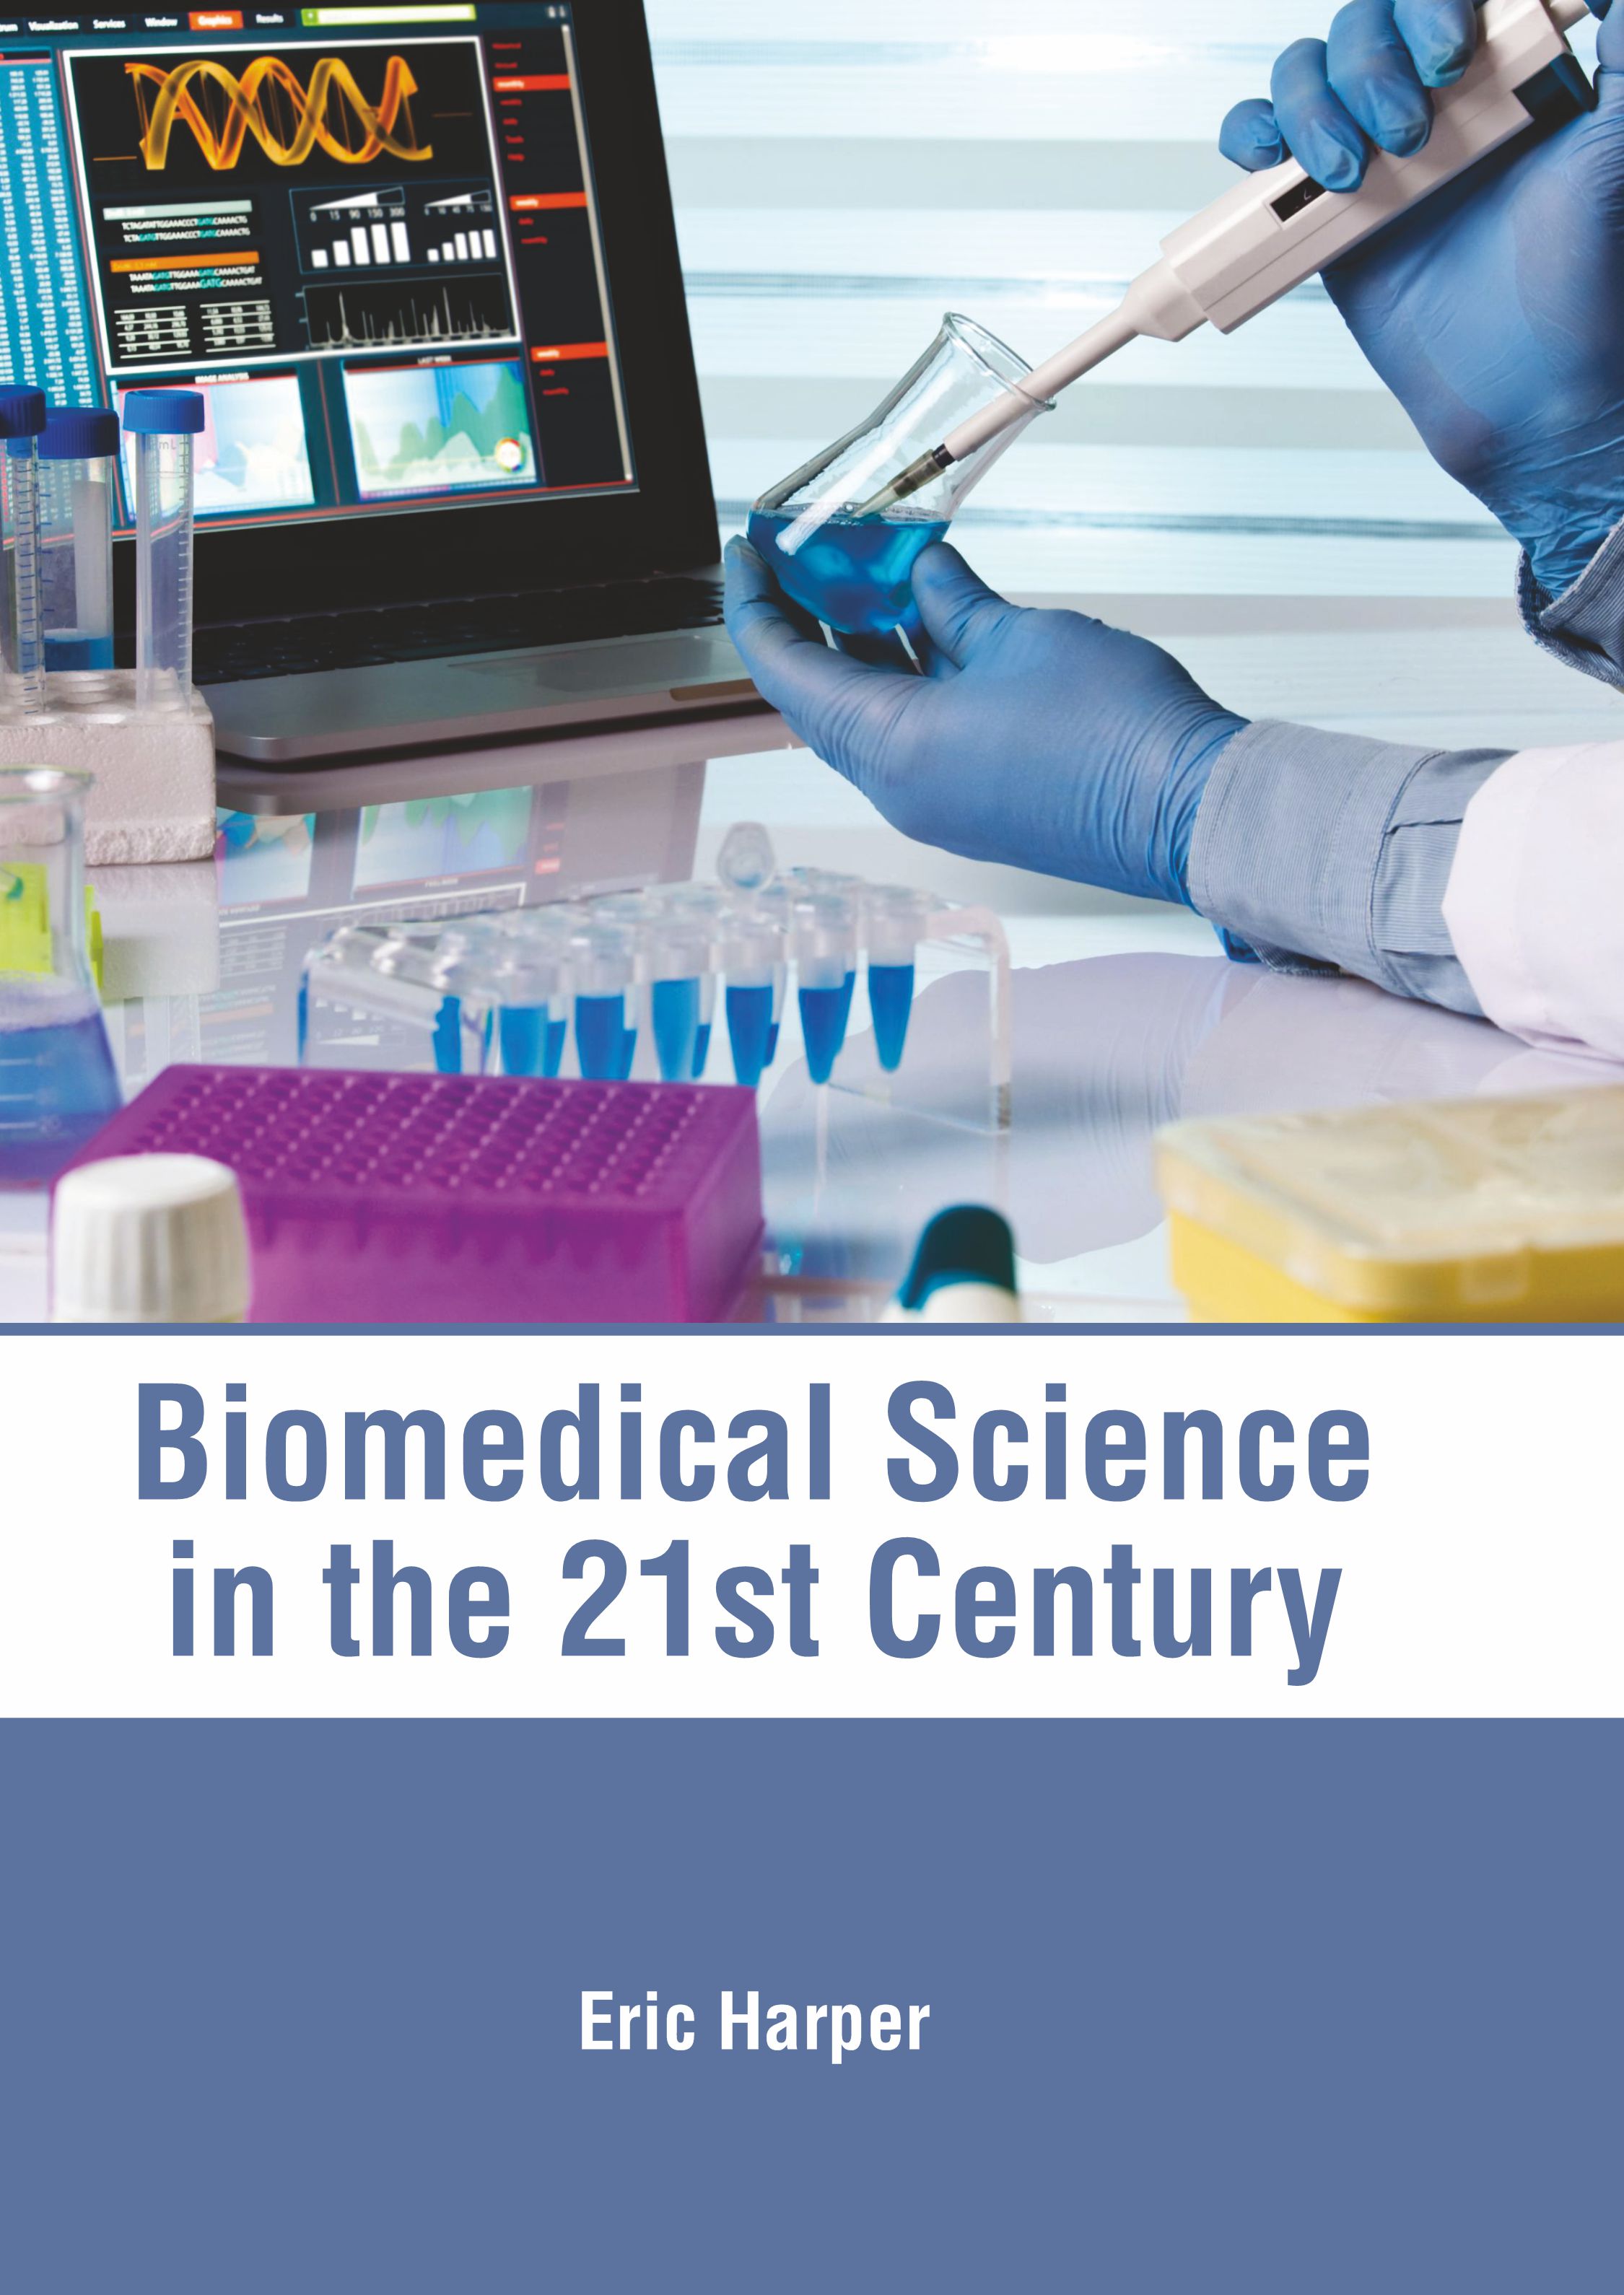 BIOMEDICAL SCIENCE IN THE 21ST CENTURY